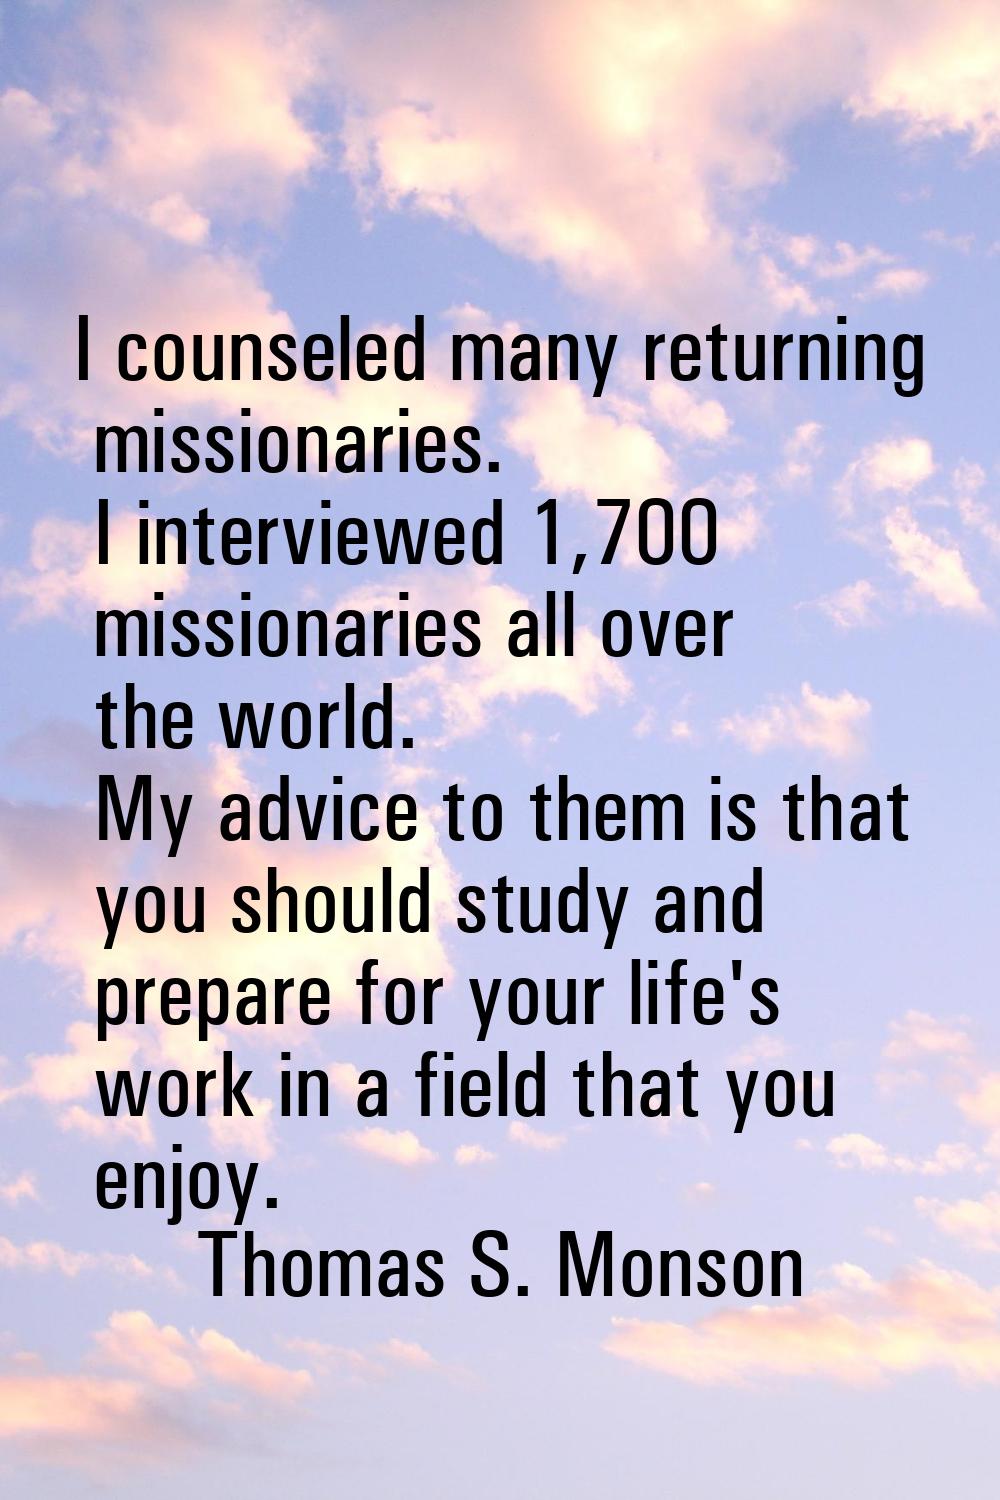 I counseled many returning missionaries. I interviewed 1,700 missionaries all over the world. My ad